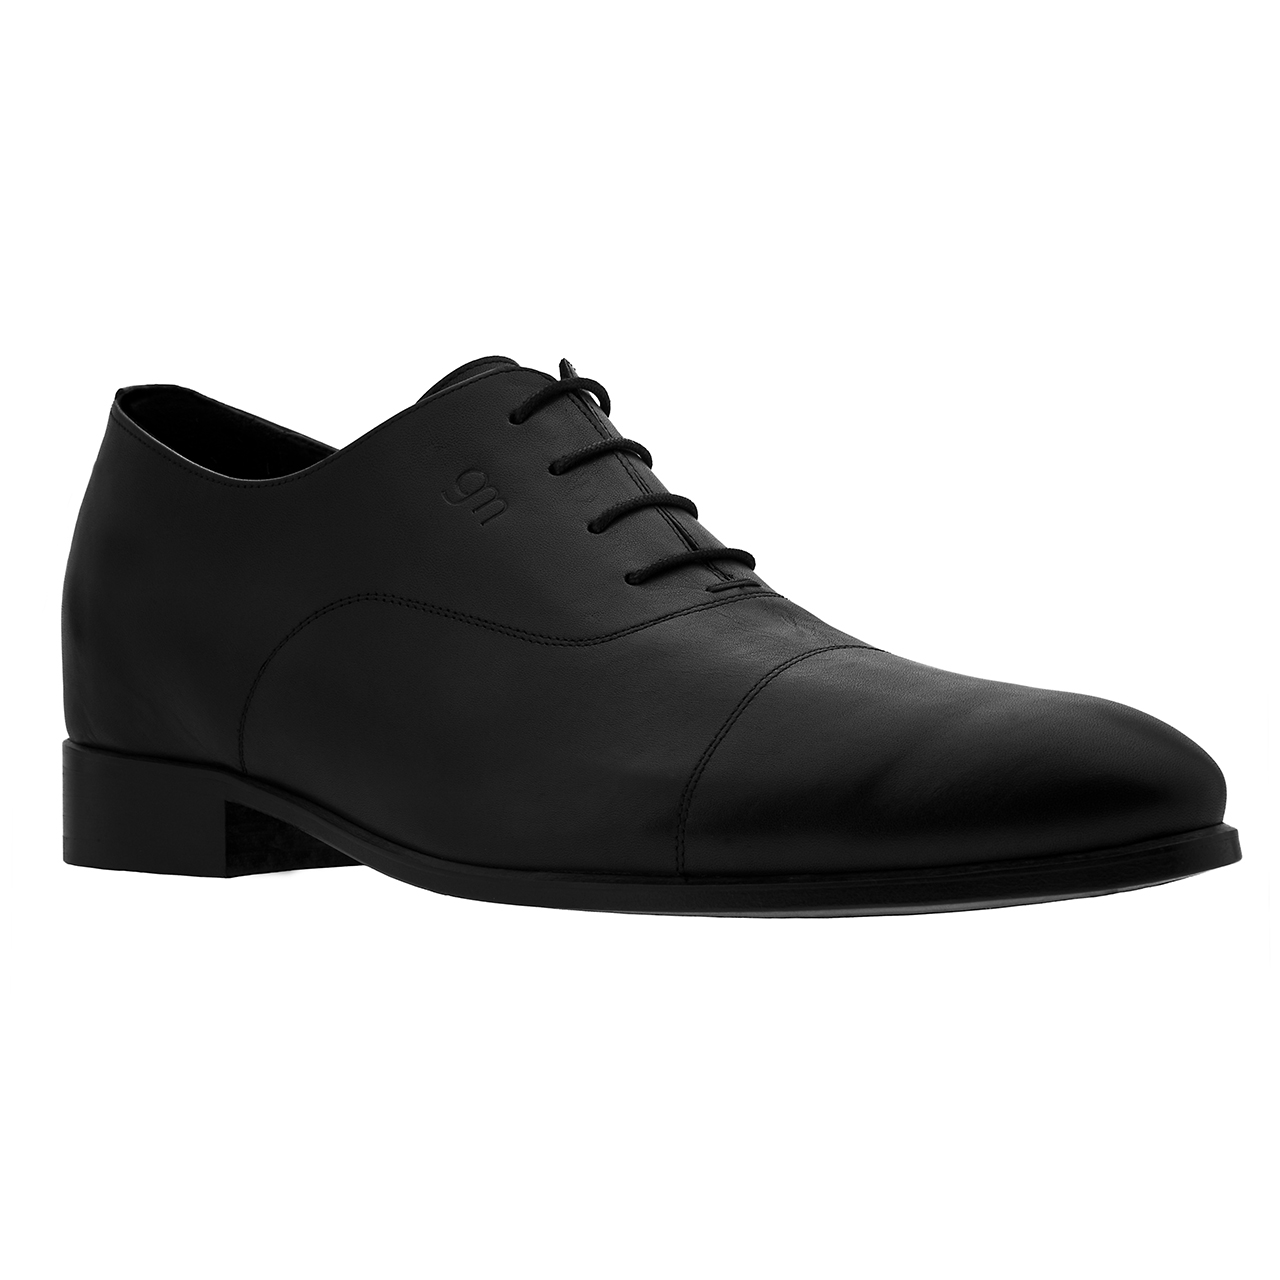 Maryland - Elevator shoes for men | Guidomaggi